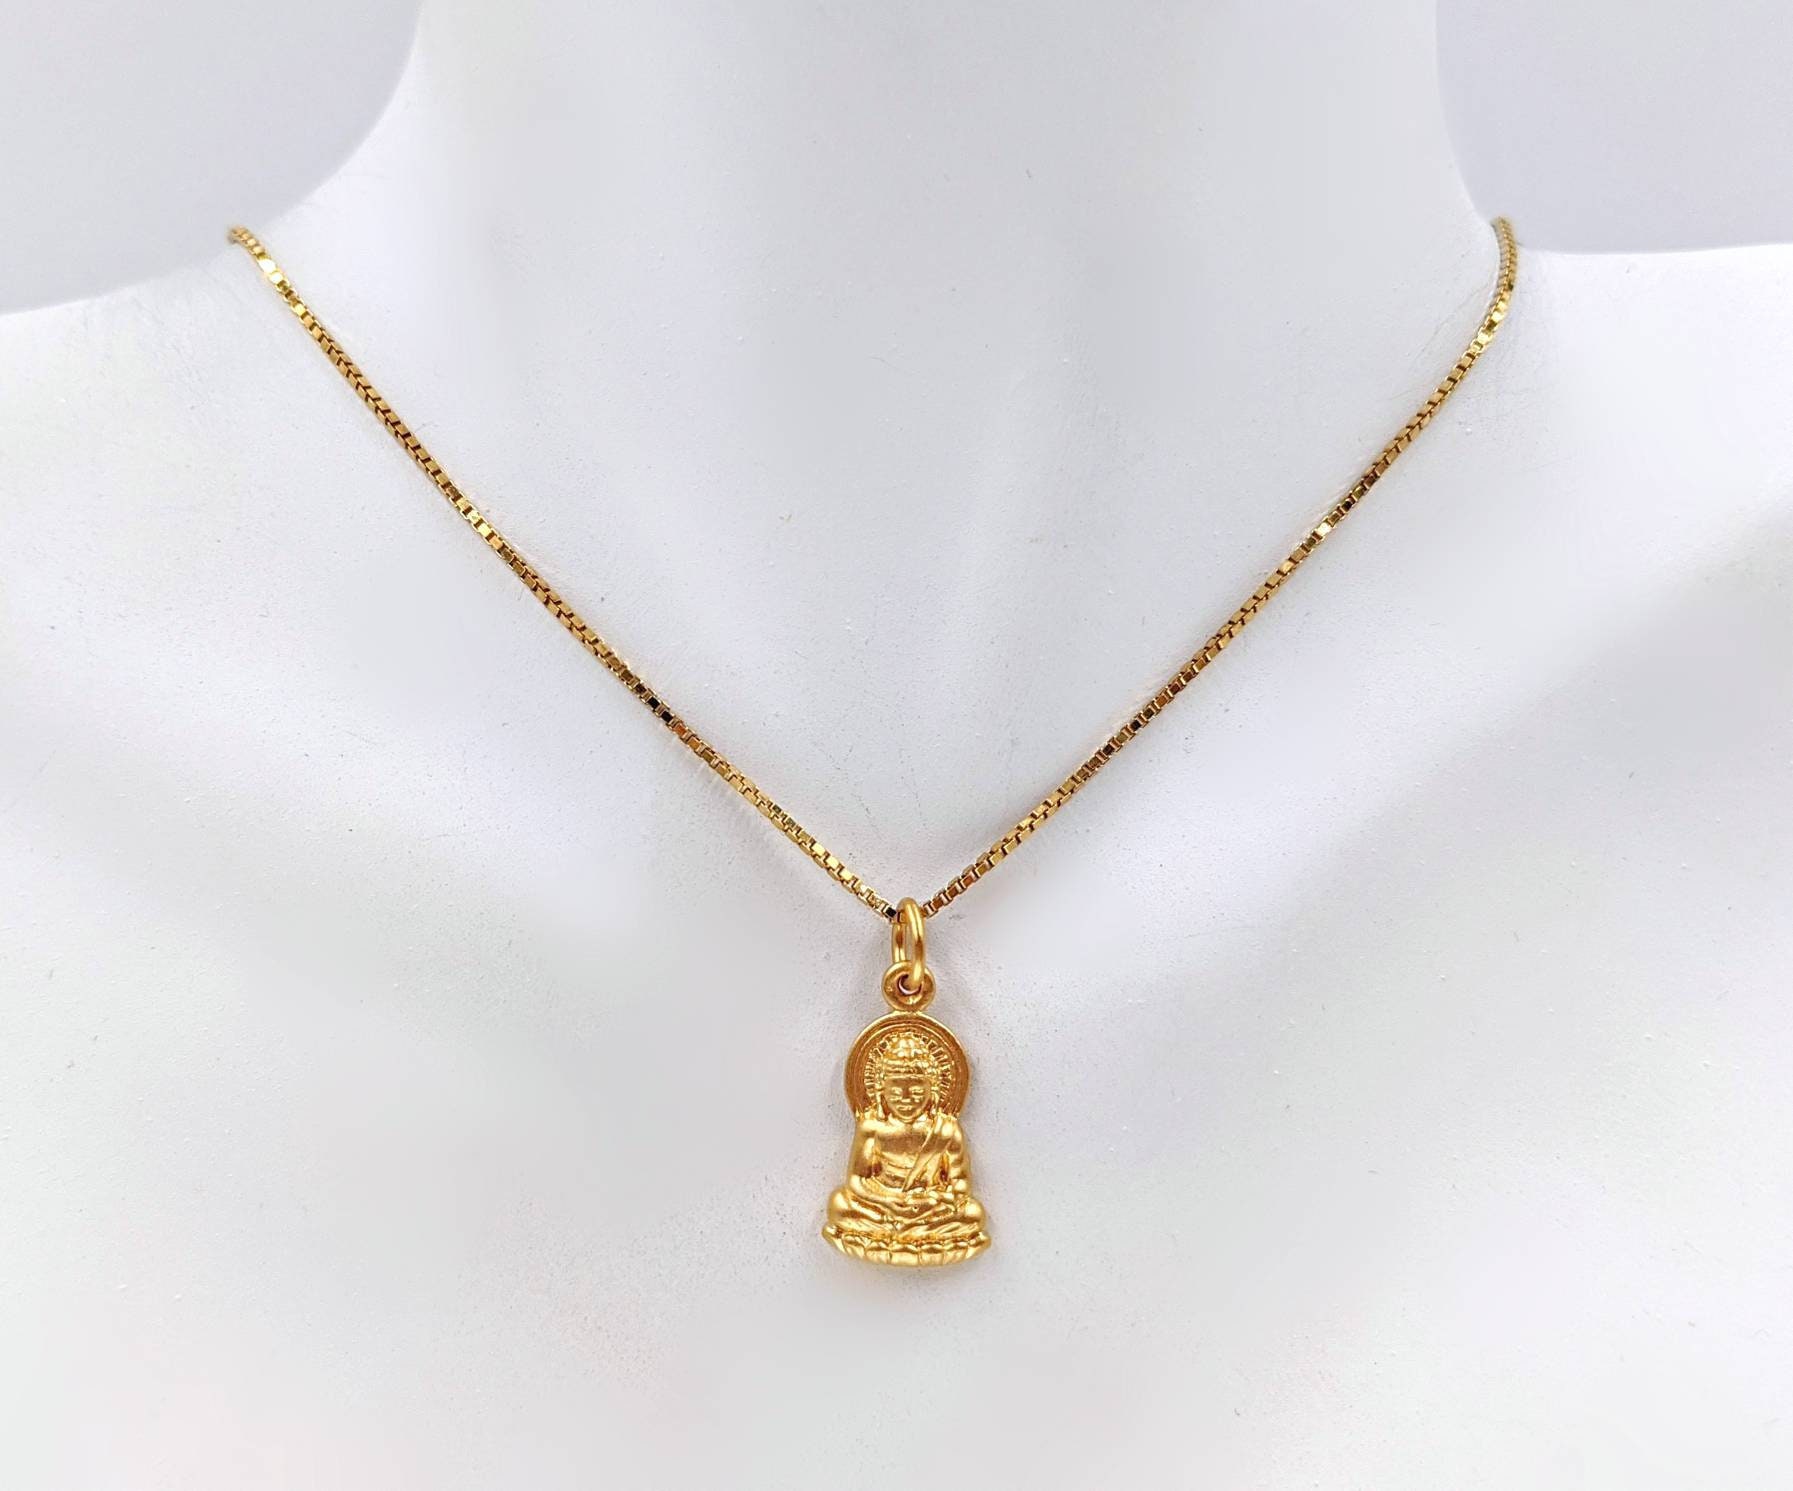 Gold Buddha Necklace Charm 24K Gold Over Bronze Small Gold Buddha Necklace  Yoga Jewelry Optional Custom Length Gold Fill Chain - Etsy